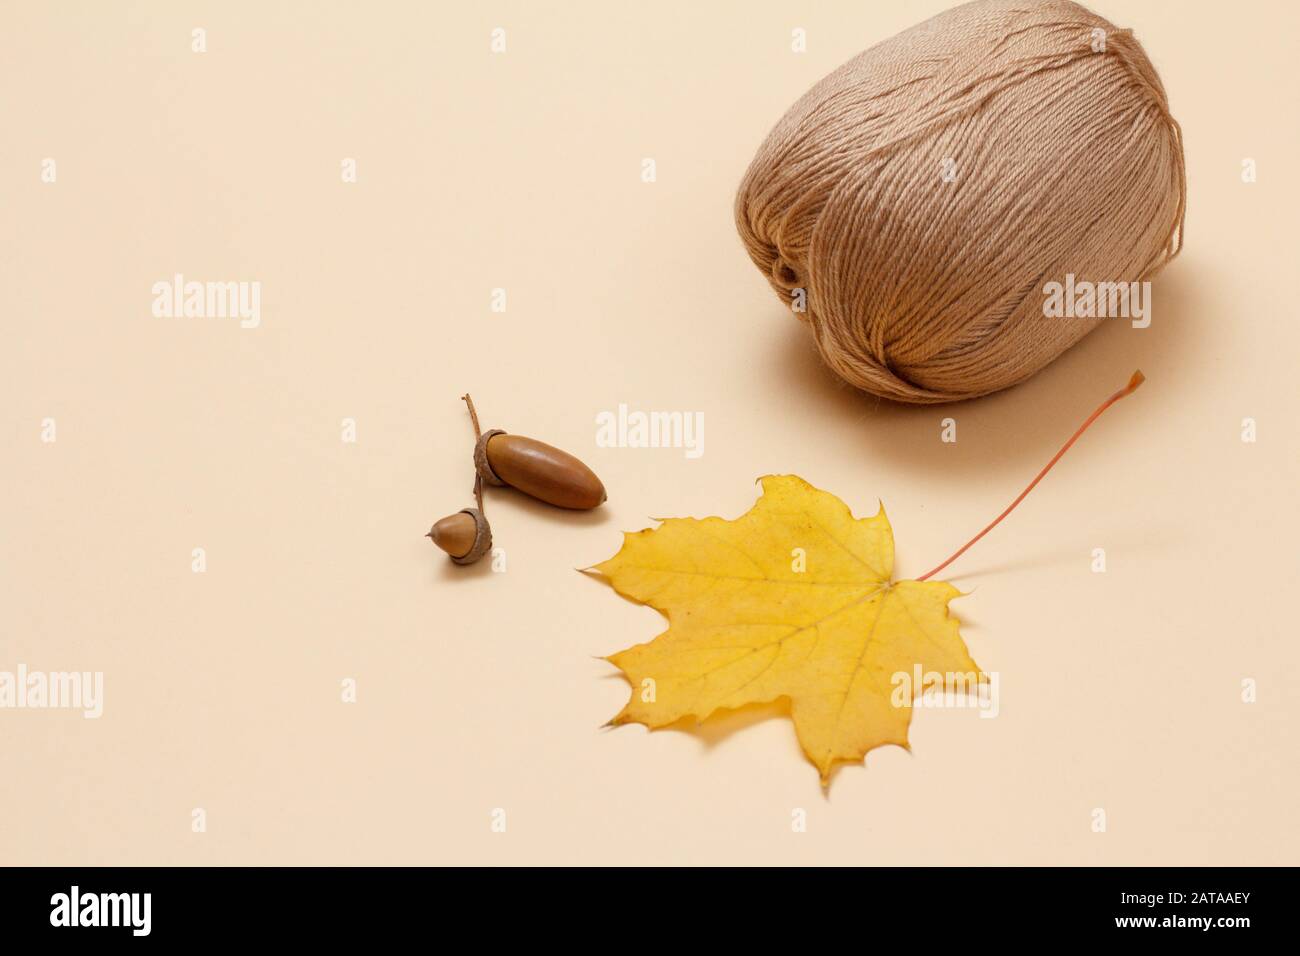 Knitting yarn balls and acorn on a beige background. Knitting concept. Stock Photo